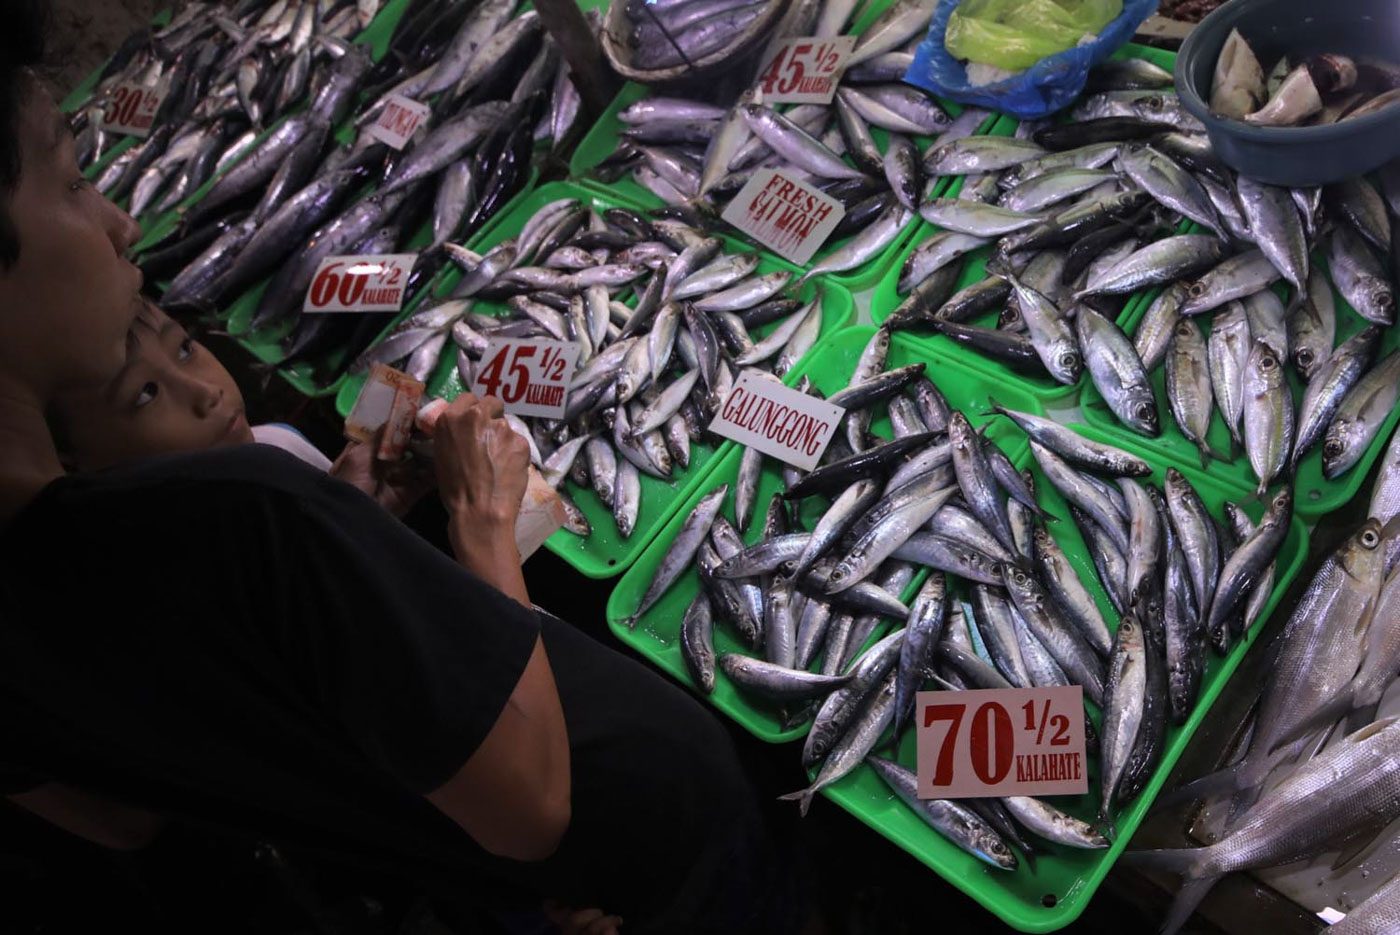 IN CHARTS: Philippine fish now more expensive, smaller – survey